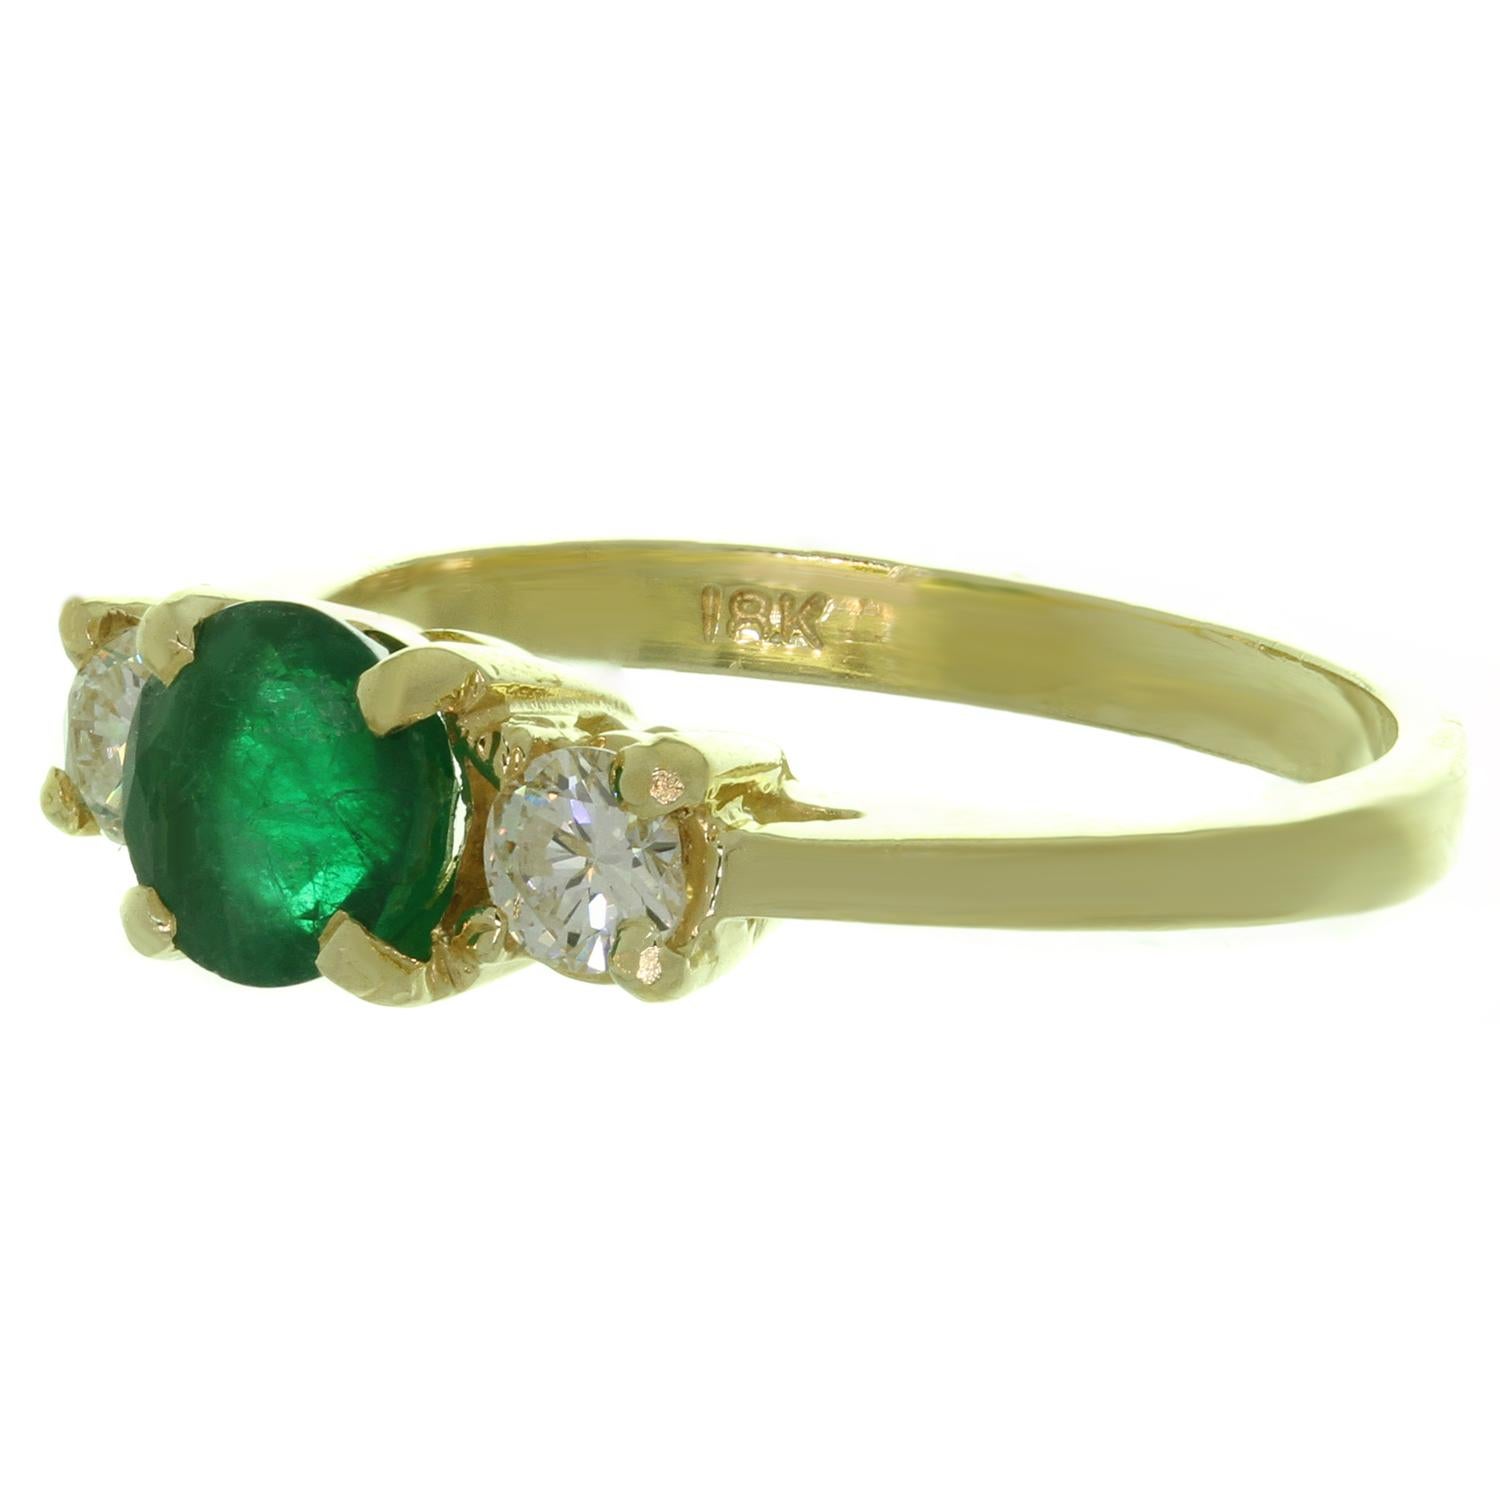 This classic estate 3-stone ring is crafted in 18k yellow gold and set with with a genuine round 6.0mm green emerald in saturated deep green color with open imperfections, weighing an estimated 0.80 carats, and 2 brilliant-cut round Si clarity G-H